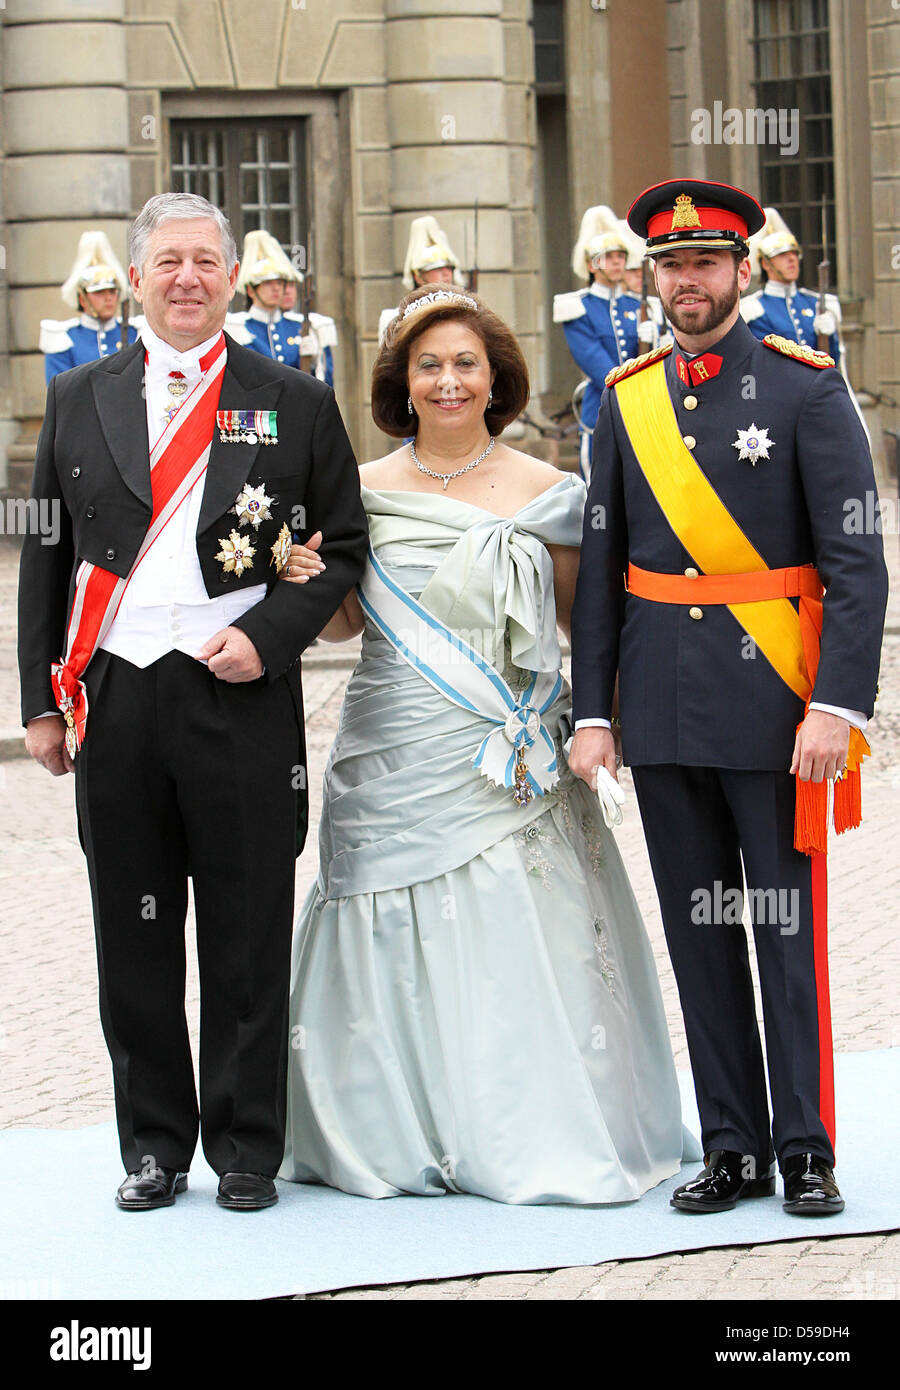 (L-R) Crown Prince Alexander of Serbia, his wife Crown Princess Katherine and Guillaume Hereditary Prince of Luxembourg arrive for the wedding of Crown Princess Victoria of Sweden and Daniel Westling in Stockholm, Sweden, 19 June 2010. Photo: Albert Nieboer (NETHERLANDS OUT) Stock Photo